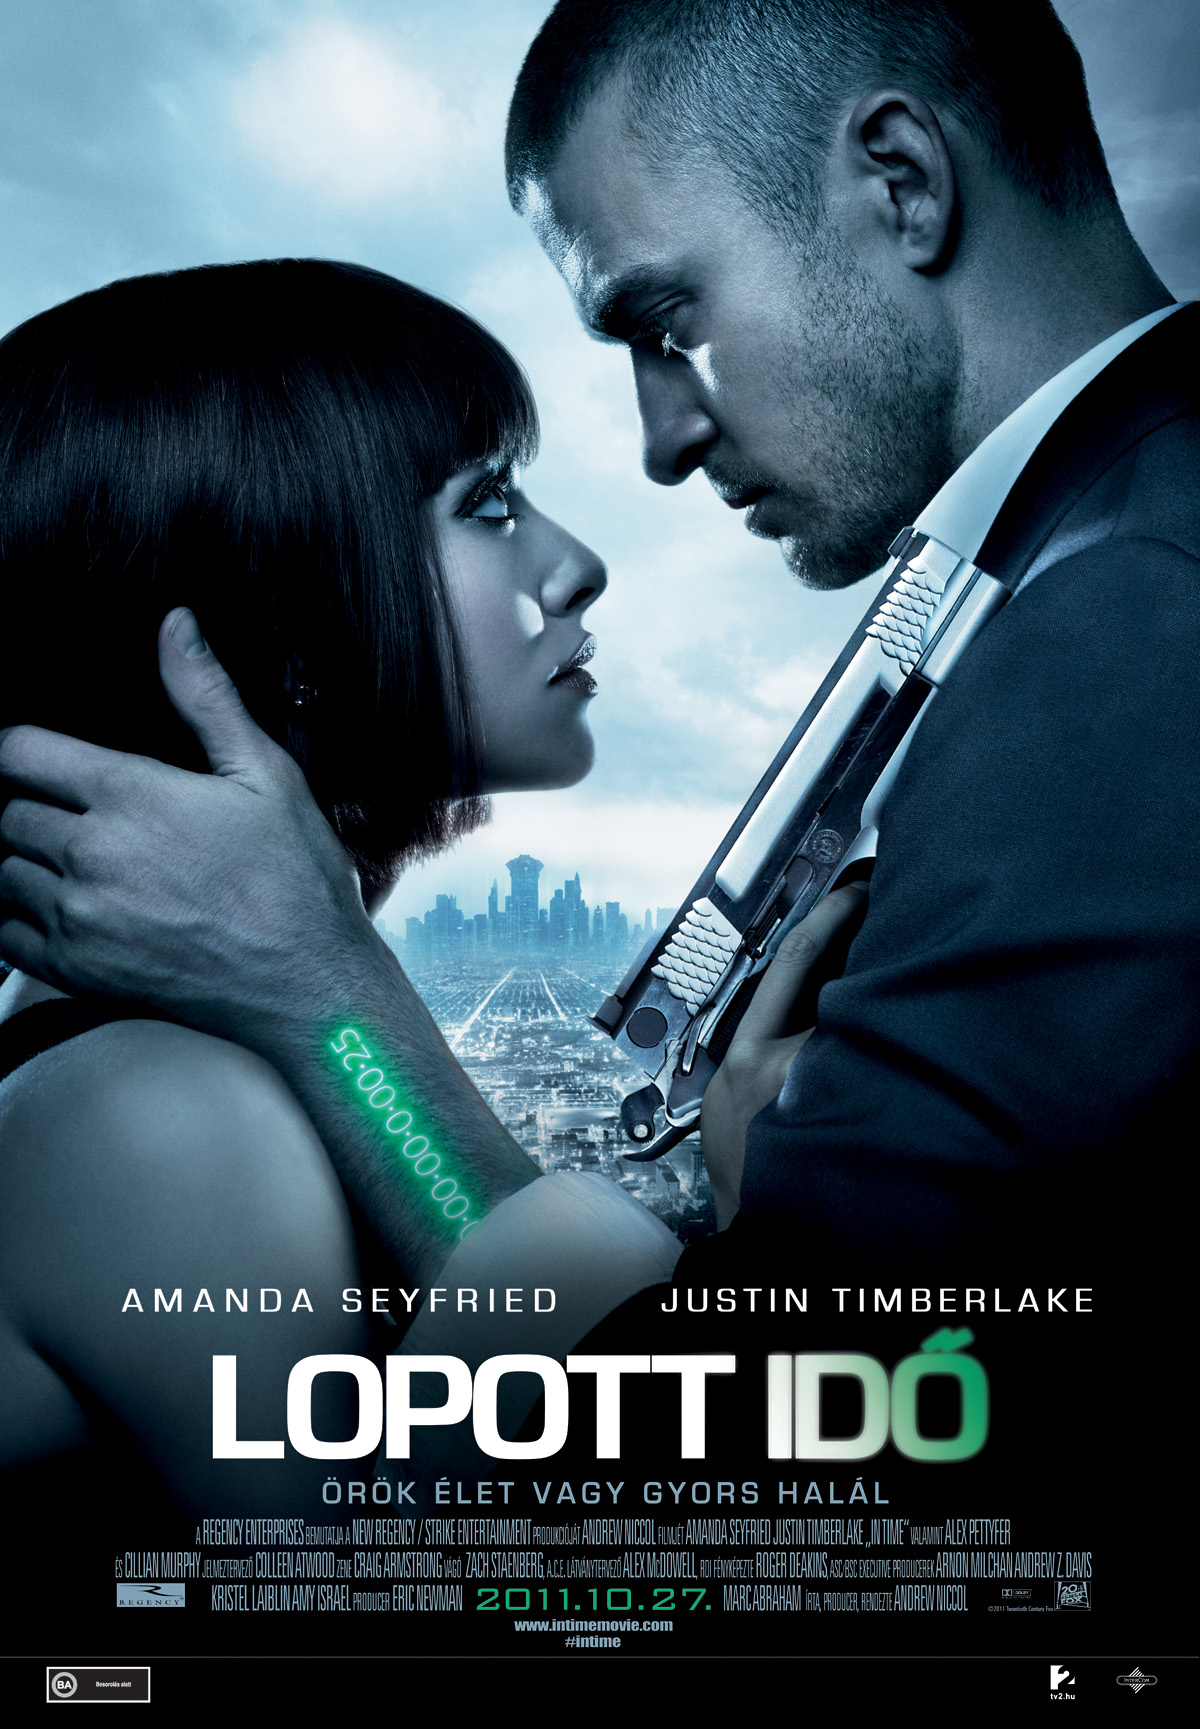 You are currently viewing Lopott idő (film)